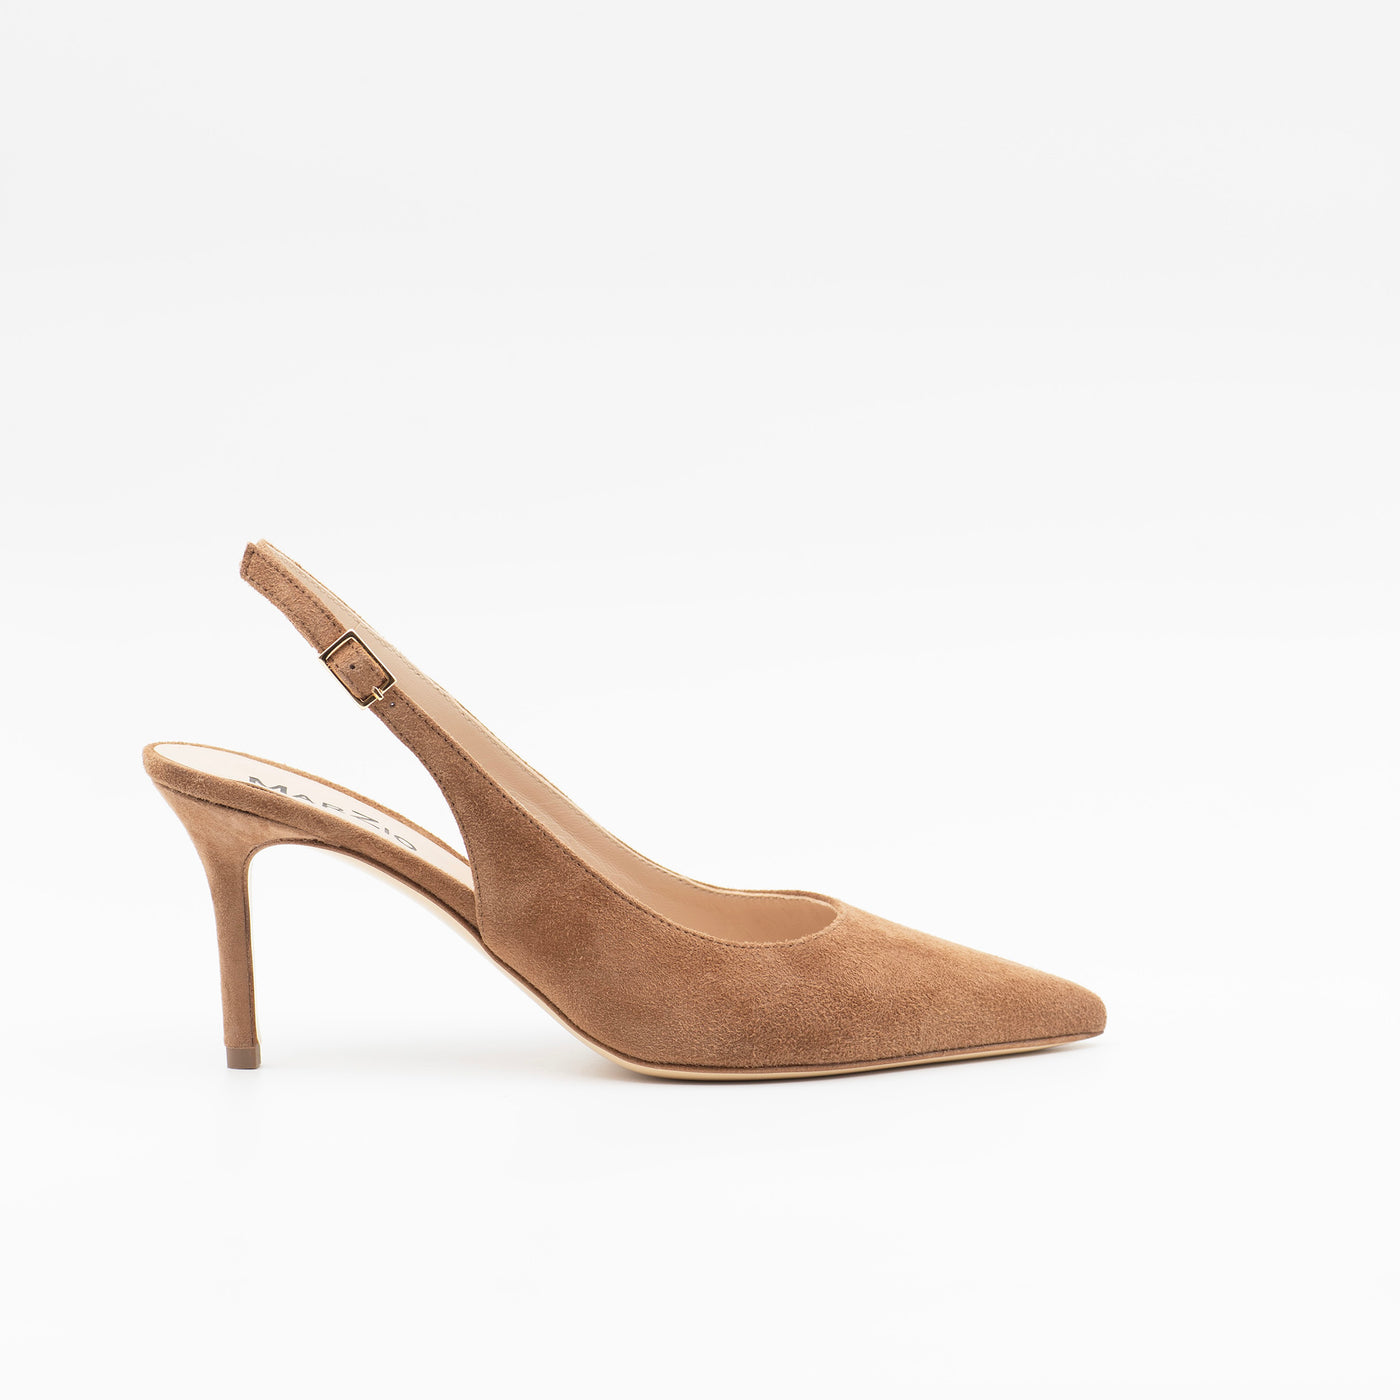 Slingback in camel suede leather